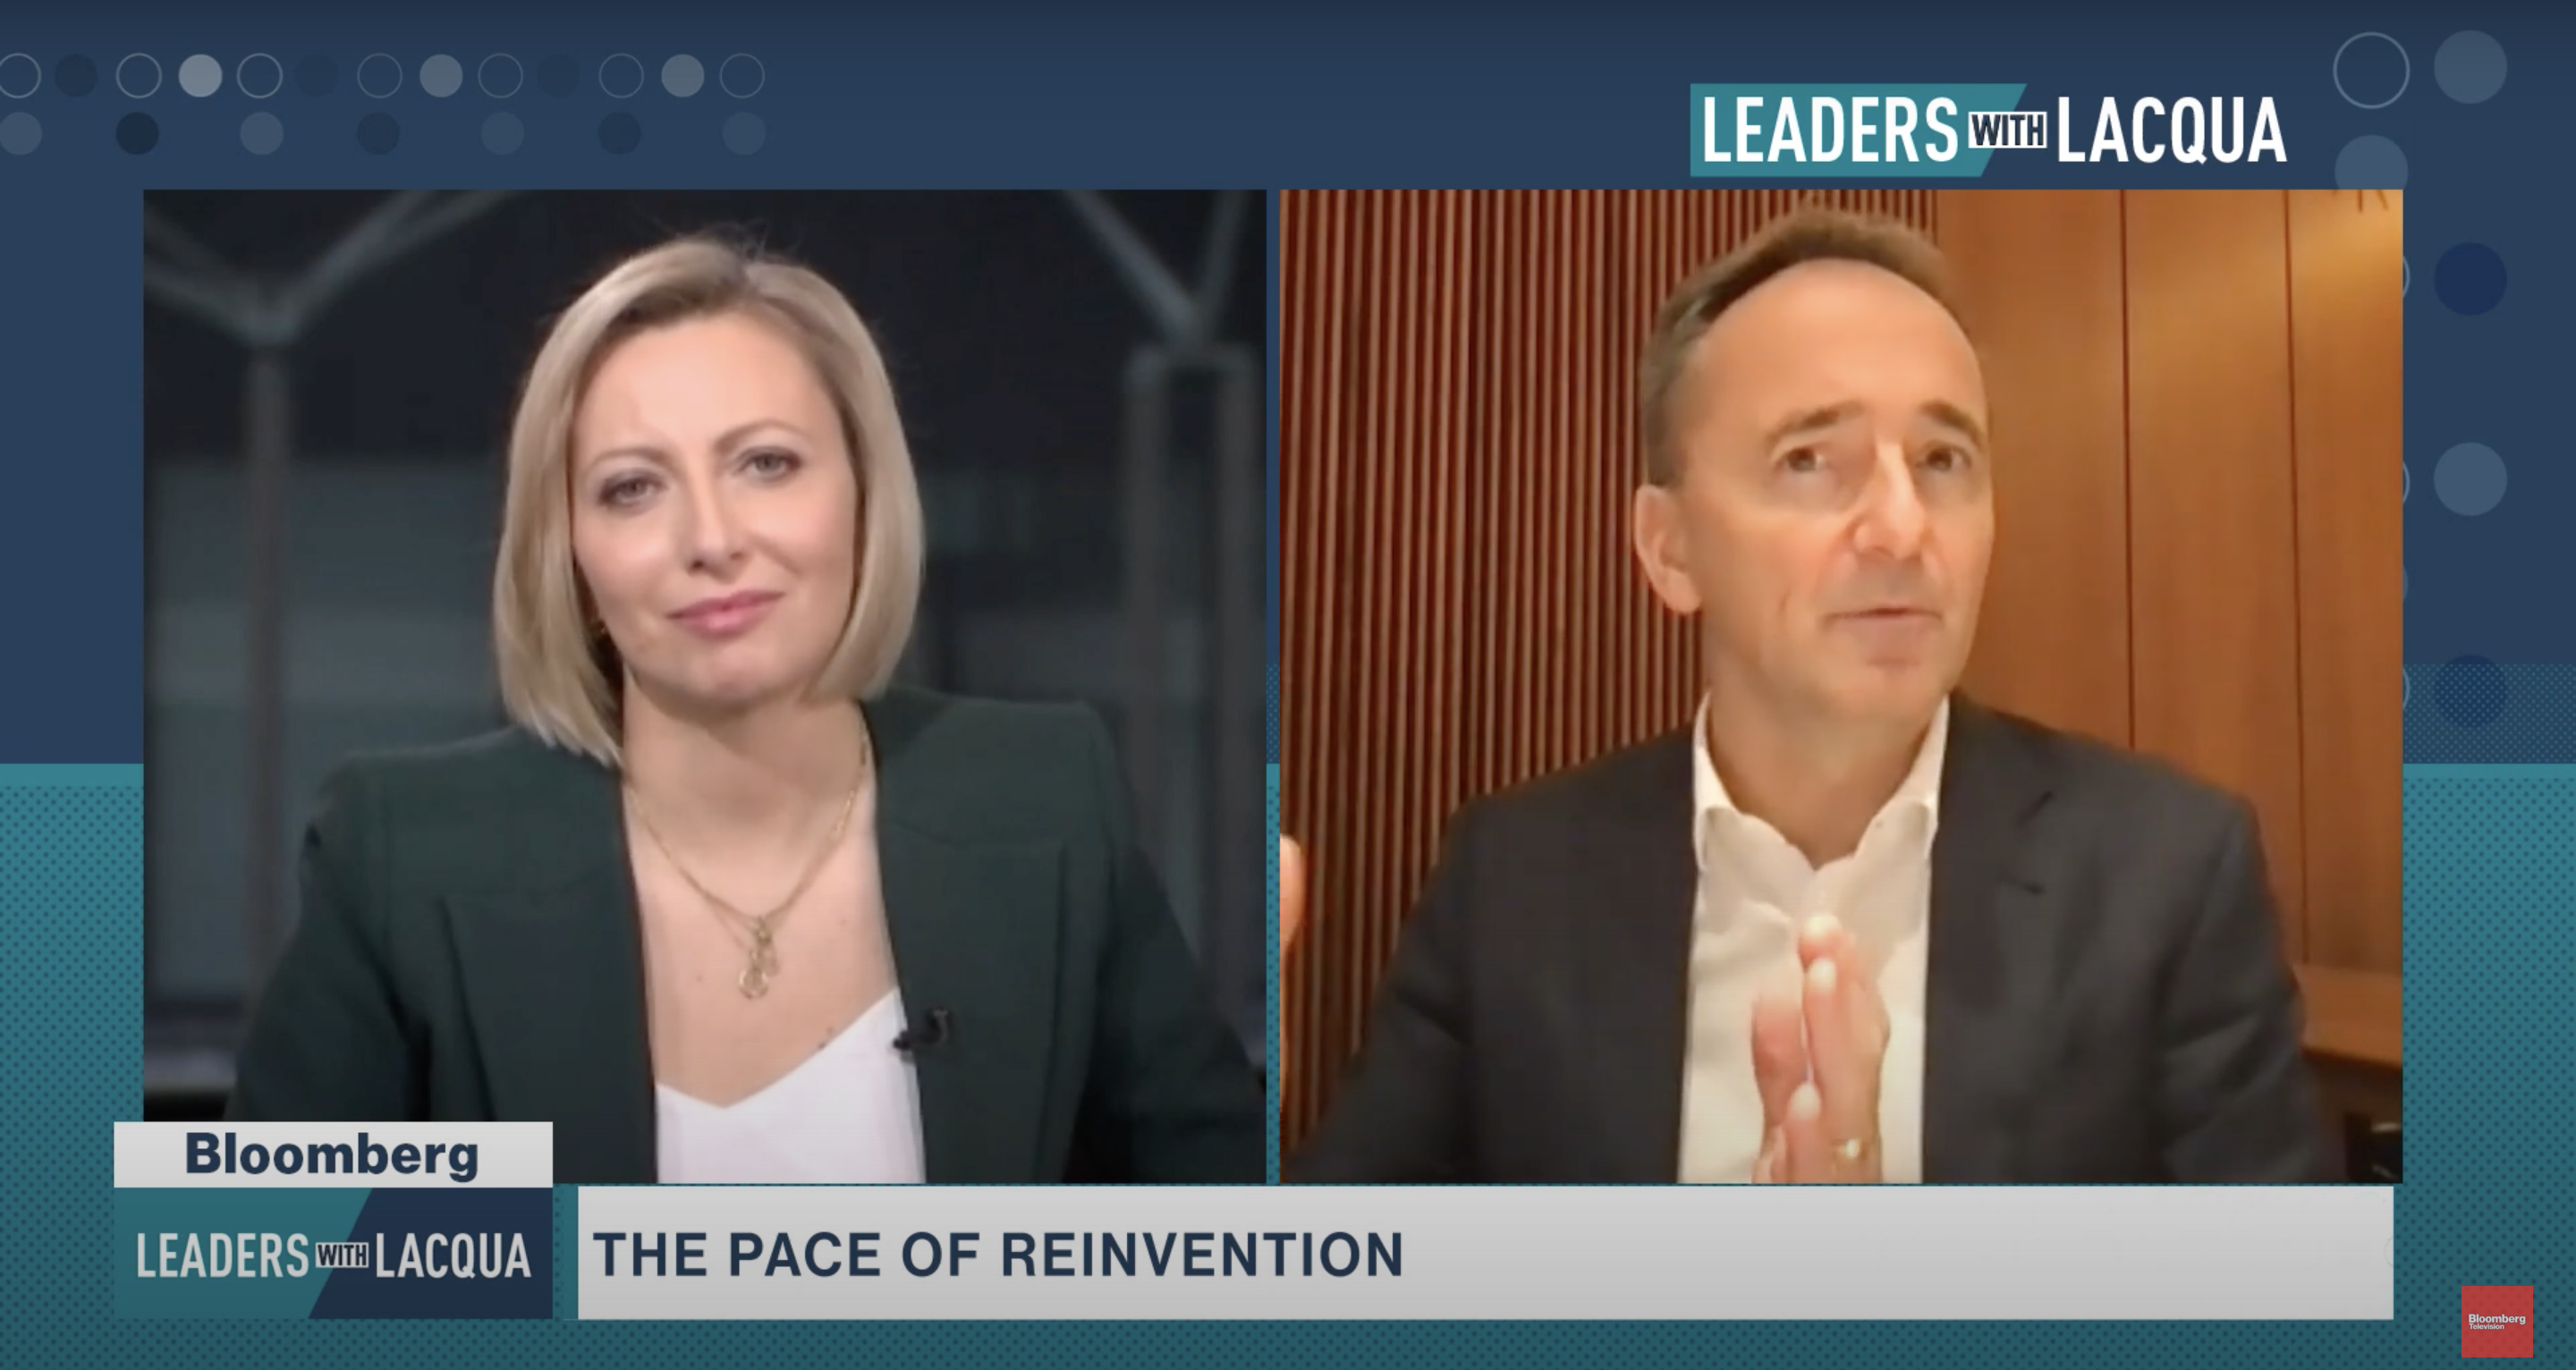 You are currently viewing Dreams and Details Explored on Bloomberg: Jim Hagemann Snabe at “Leaders with Lacqua” (Video)